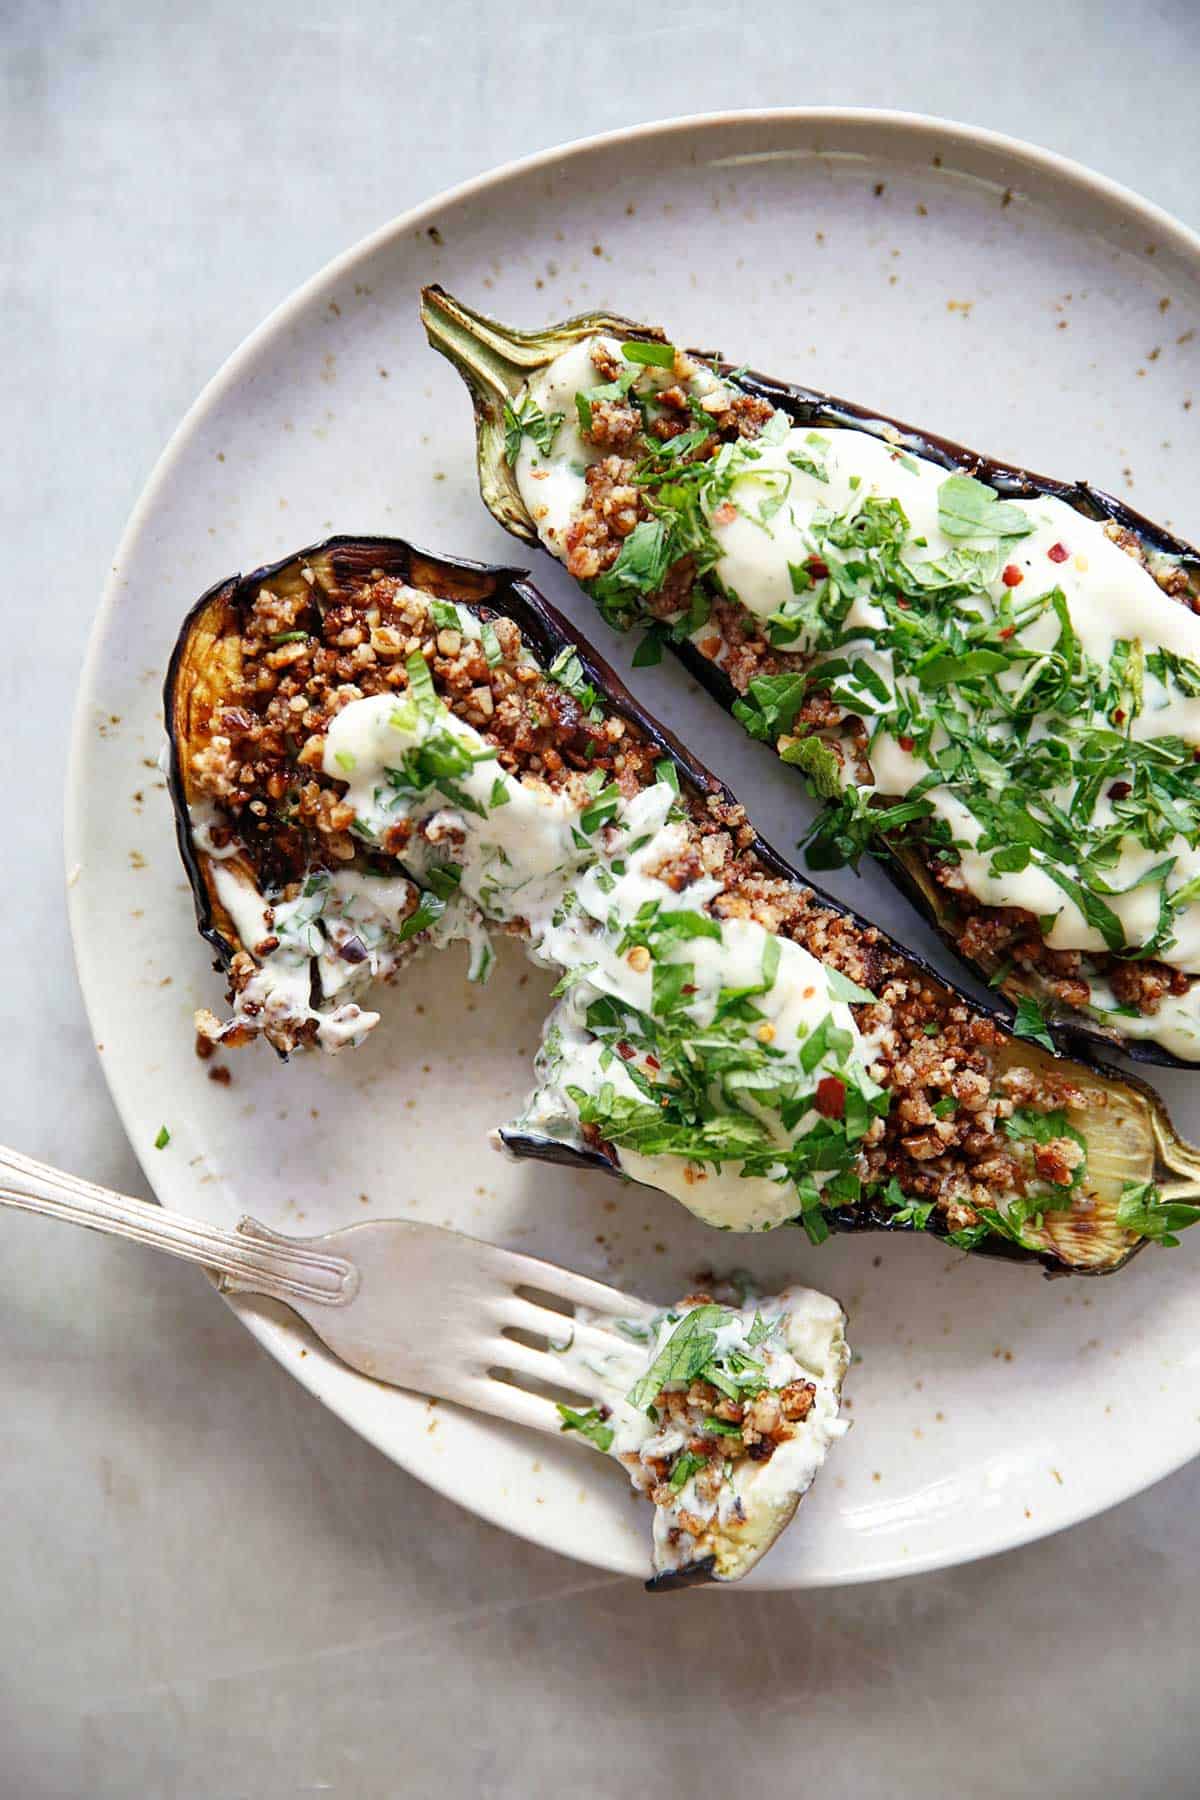 Lexi S Clean Kitchen Loaded Grilled Eggplant With Creamy Herb Sauce,Rudbeckia Denver Daisy